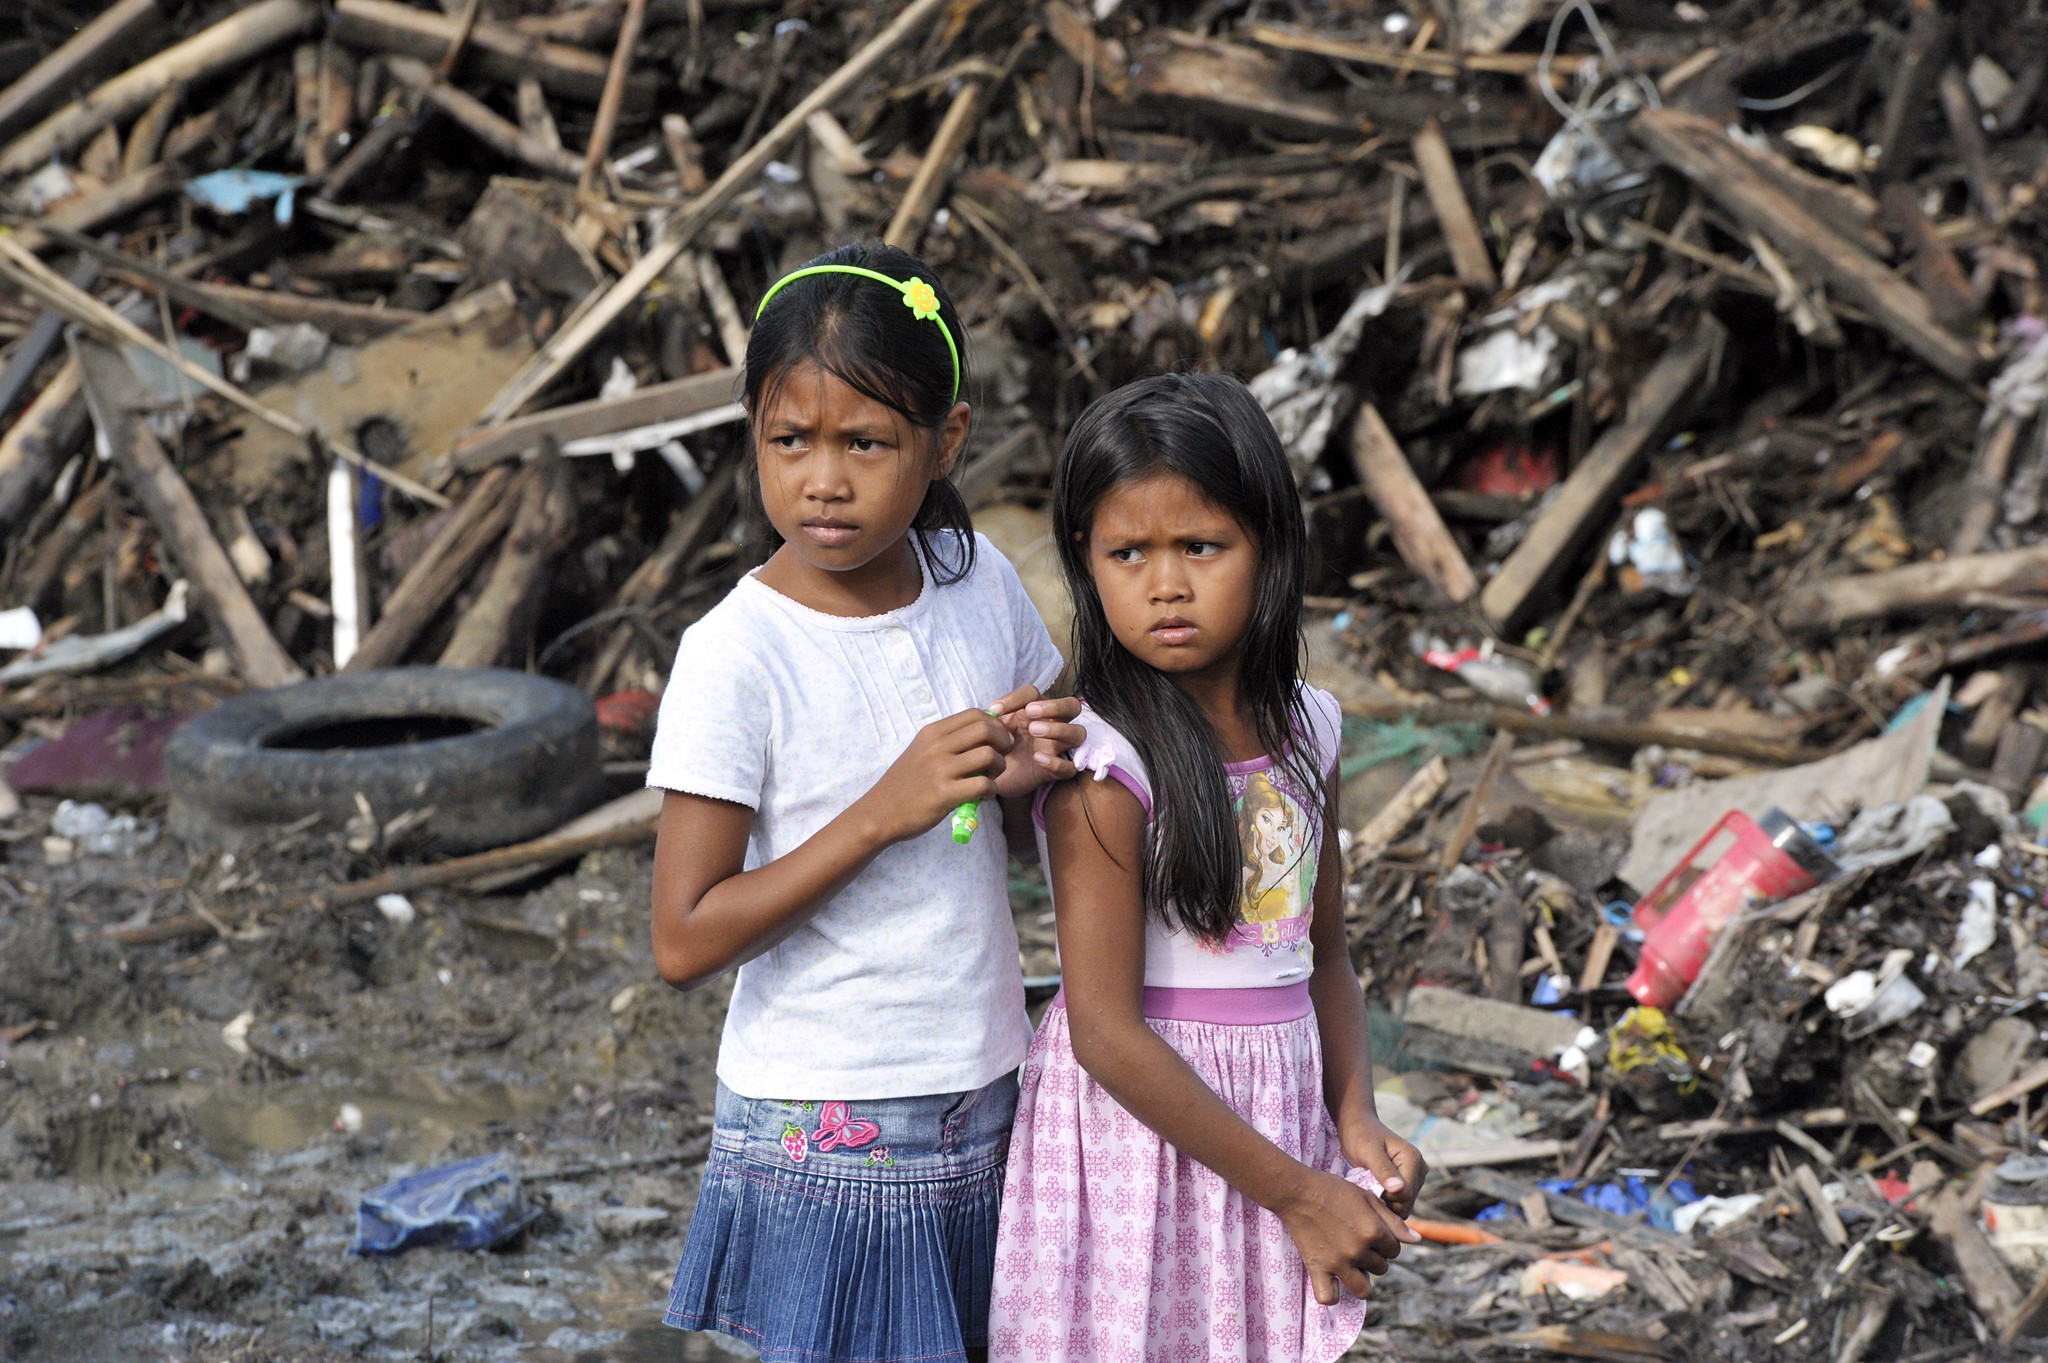 Two girls from Tacloban, Phillipines, after the super typhoon in 2013.